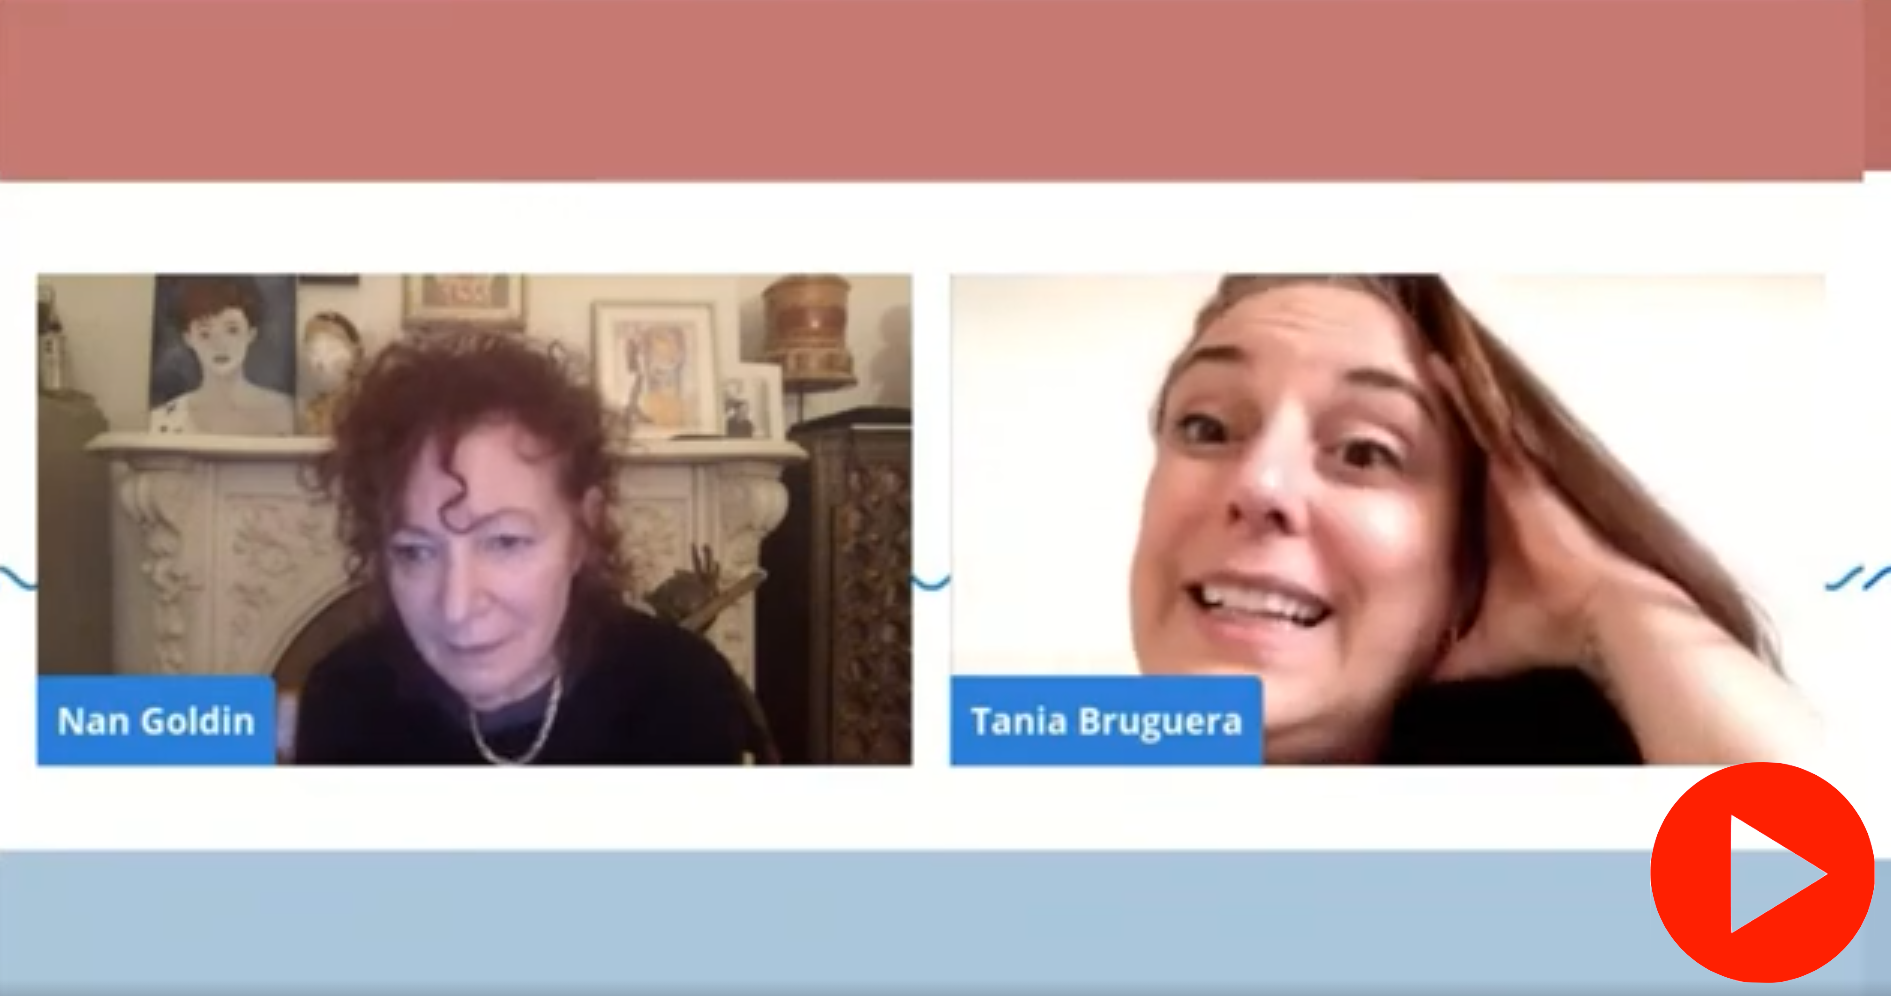 Image of artists Nan Goldin and Tania Bruguera on the a side by side screen as they talk in conversation. They are against a red, white, and blue stripped background.